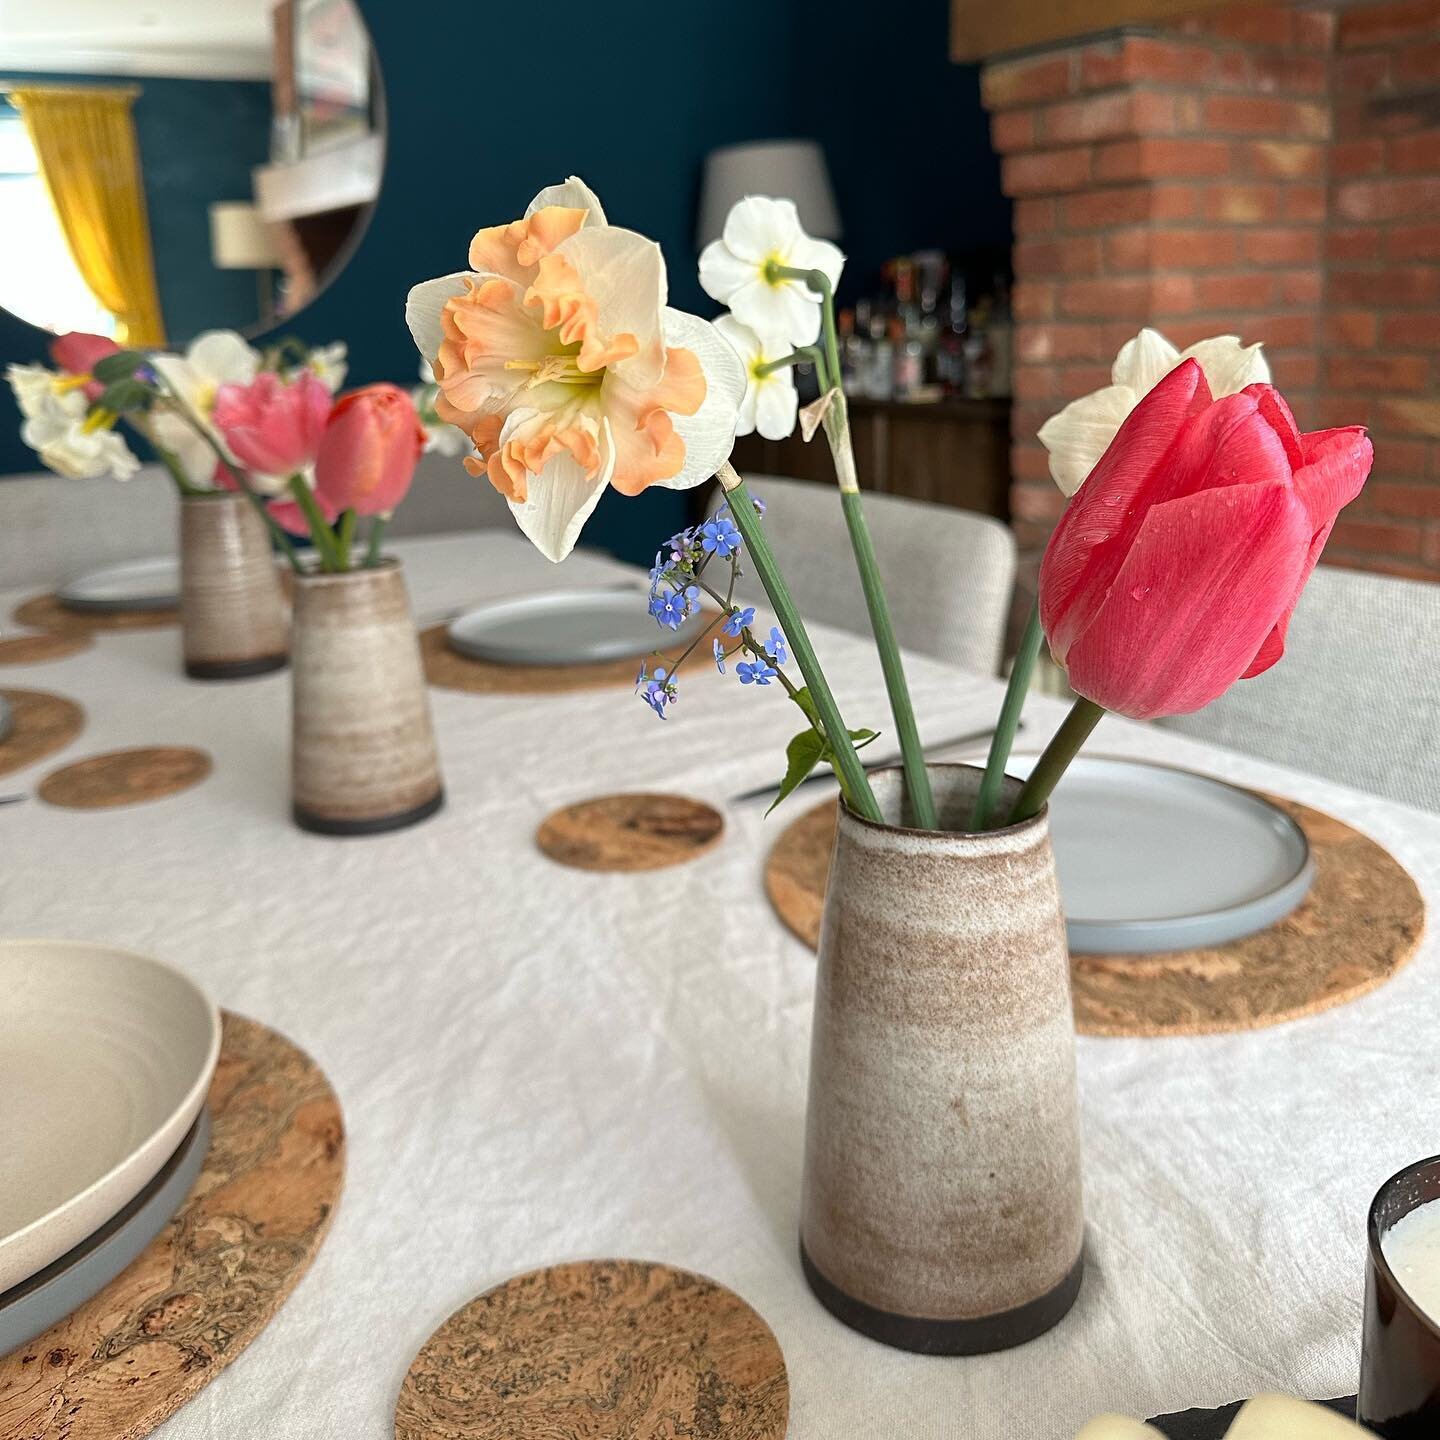 Enjoying the simple things, picking flowers from the garden to decorate the table. 🌸 We planted these bulbs last November it was cold and rainy, patiently we waited - first came the first signs of spring with crocus, then the hyacinth, then the daff